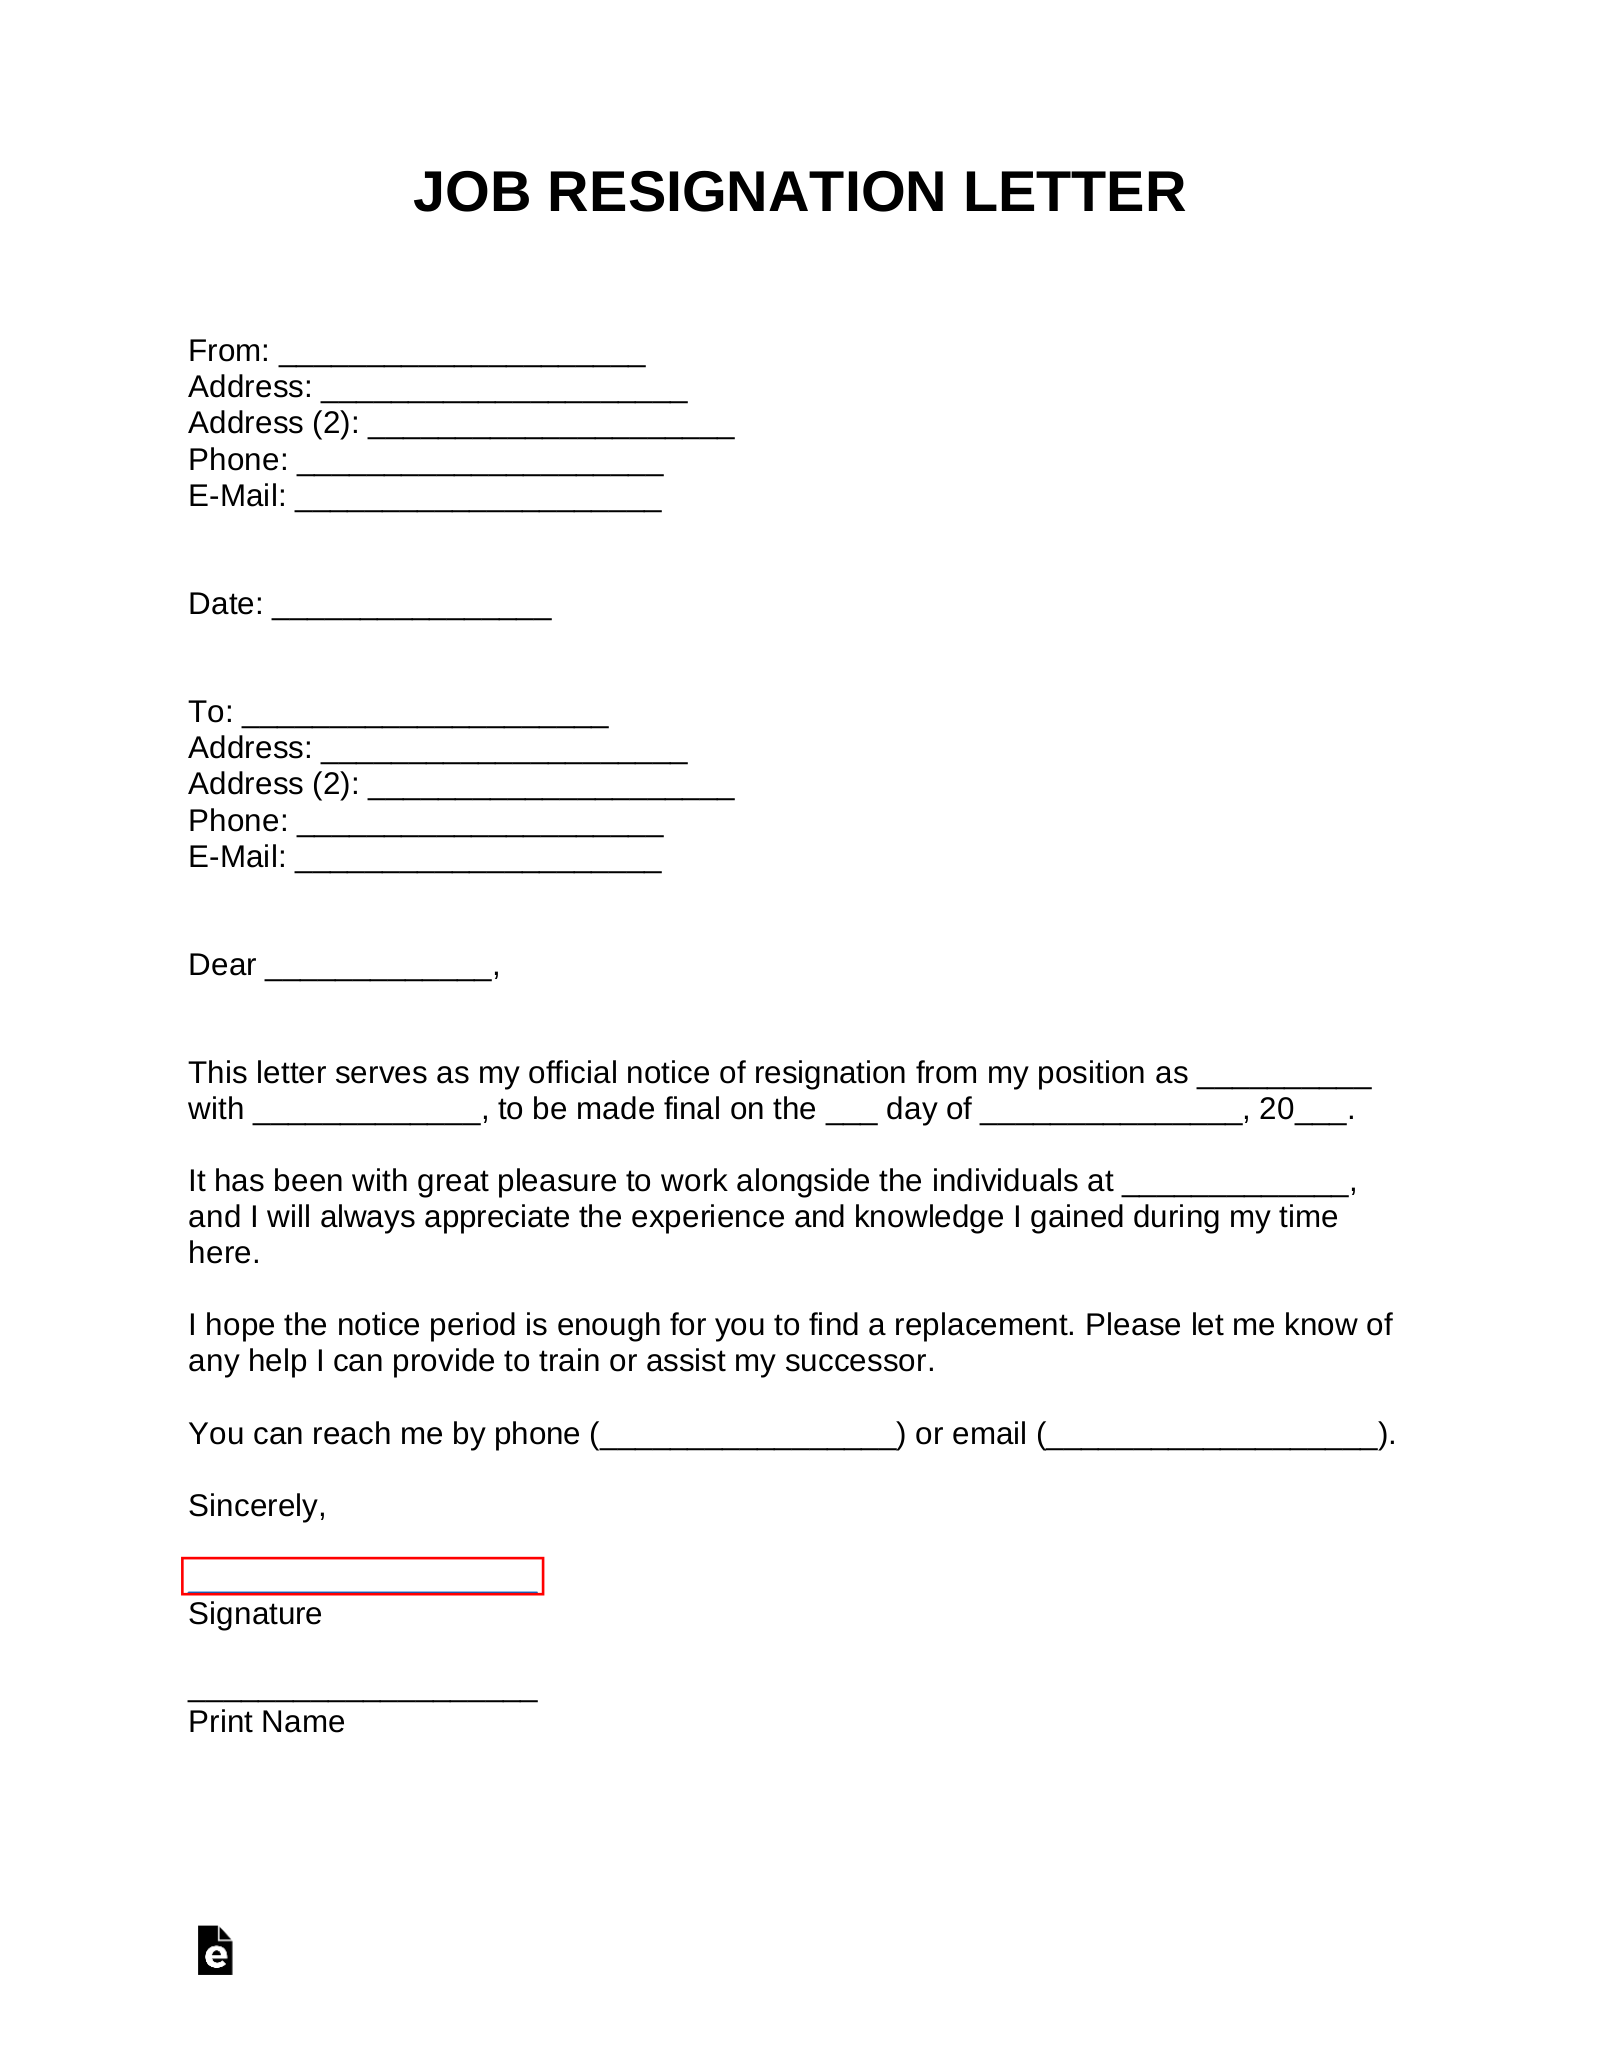 Free Job Resignation Letter Template With Samples Pdf Word Eforms